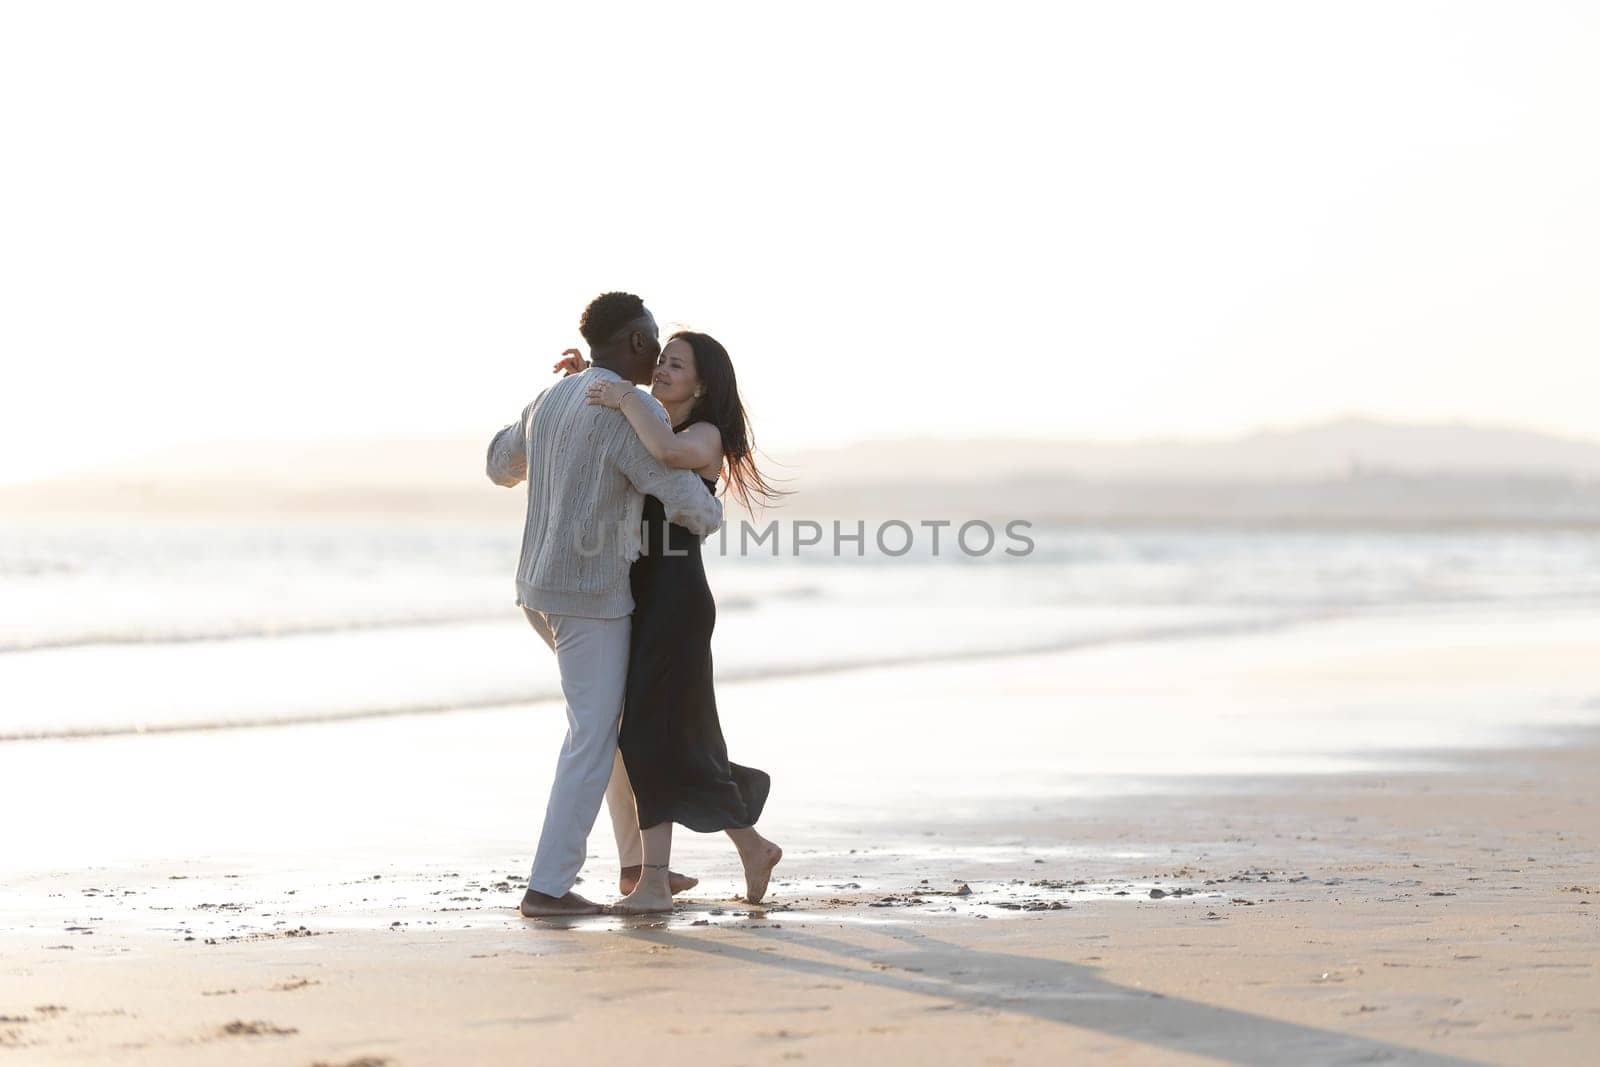 A couple is dancing on the beach, with the man holding the woman in his arms. The scene is romantic and intimate, with the couple enjoying each other's company in a beautiful natural setting